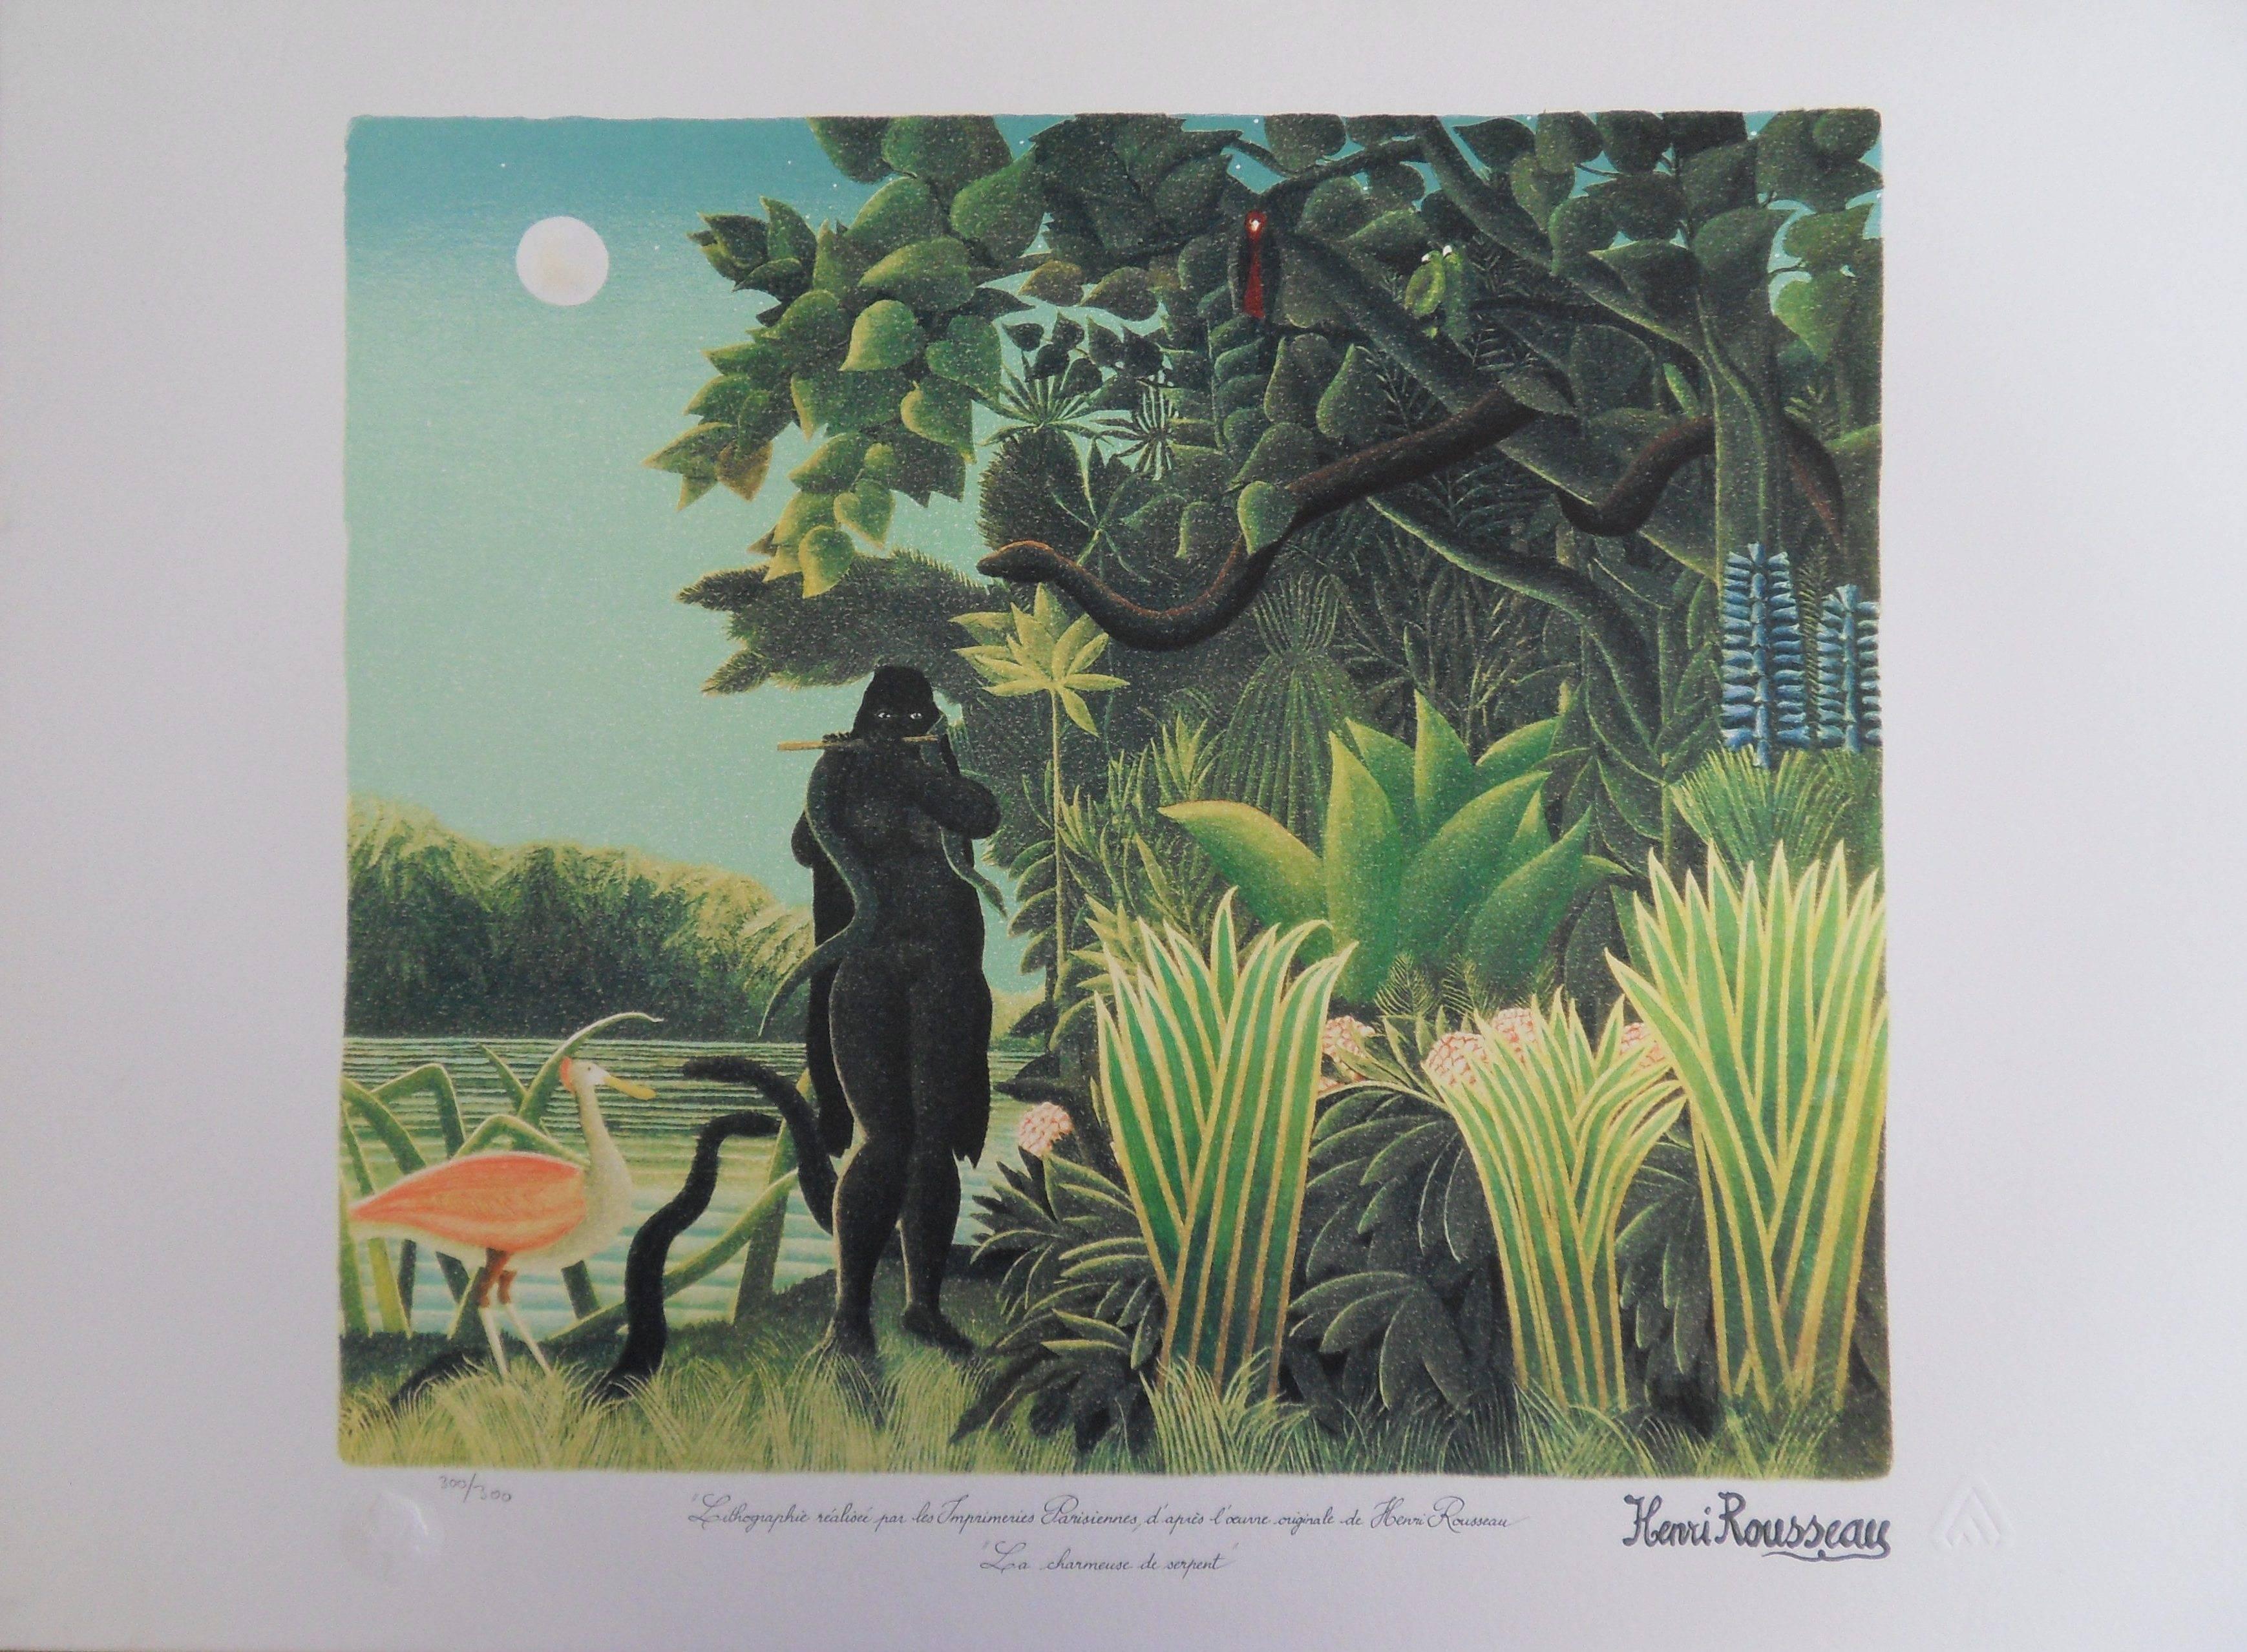 (after) Henri Rousseau Figurative Print - The Snake Charmer - Lithograph - 300ex